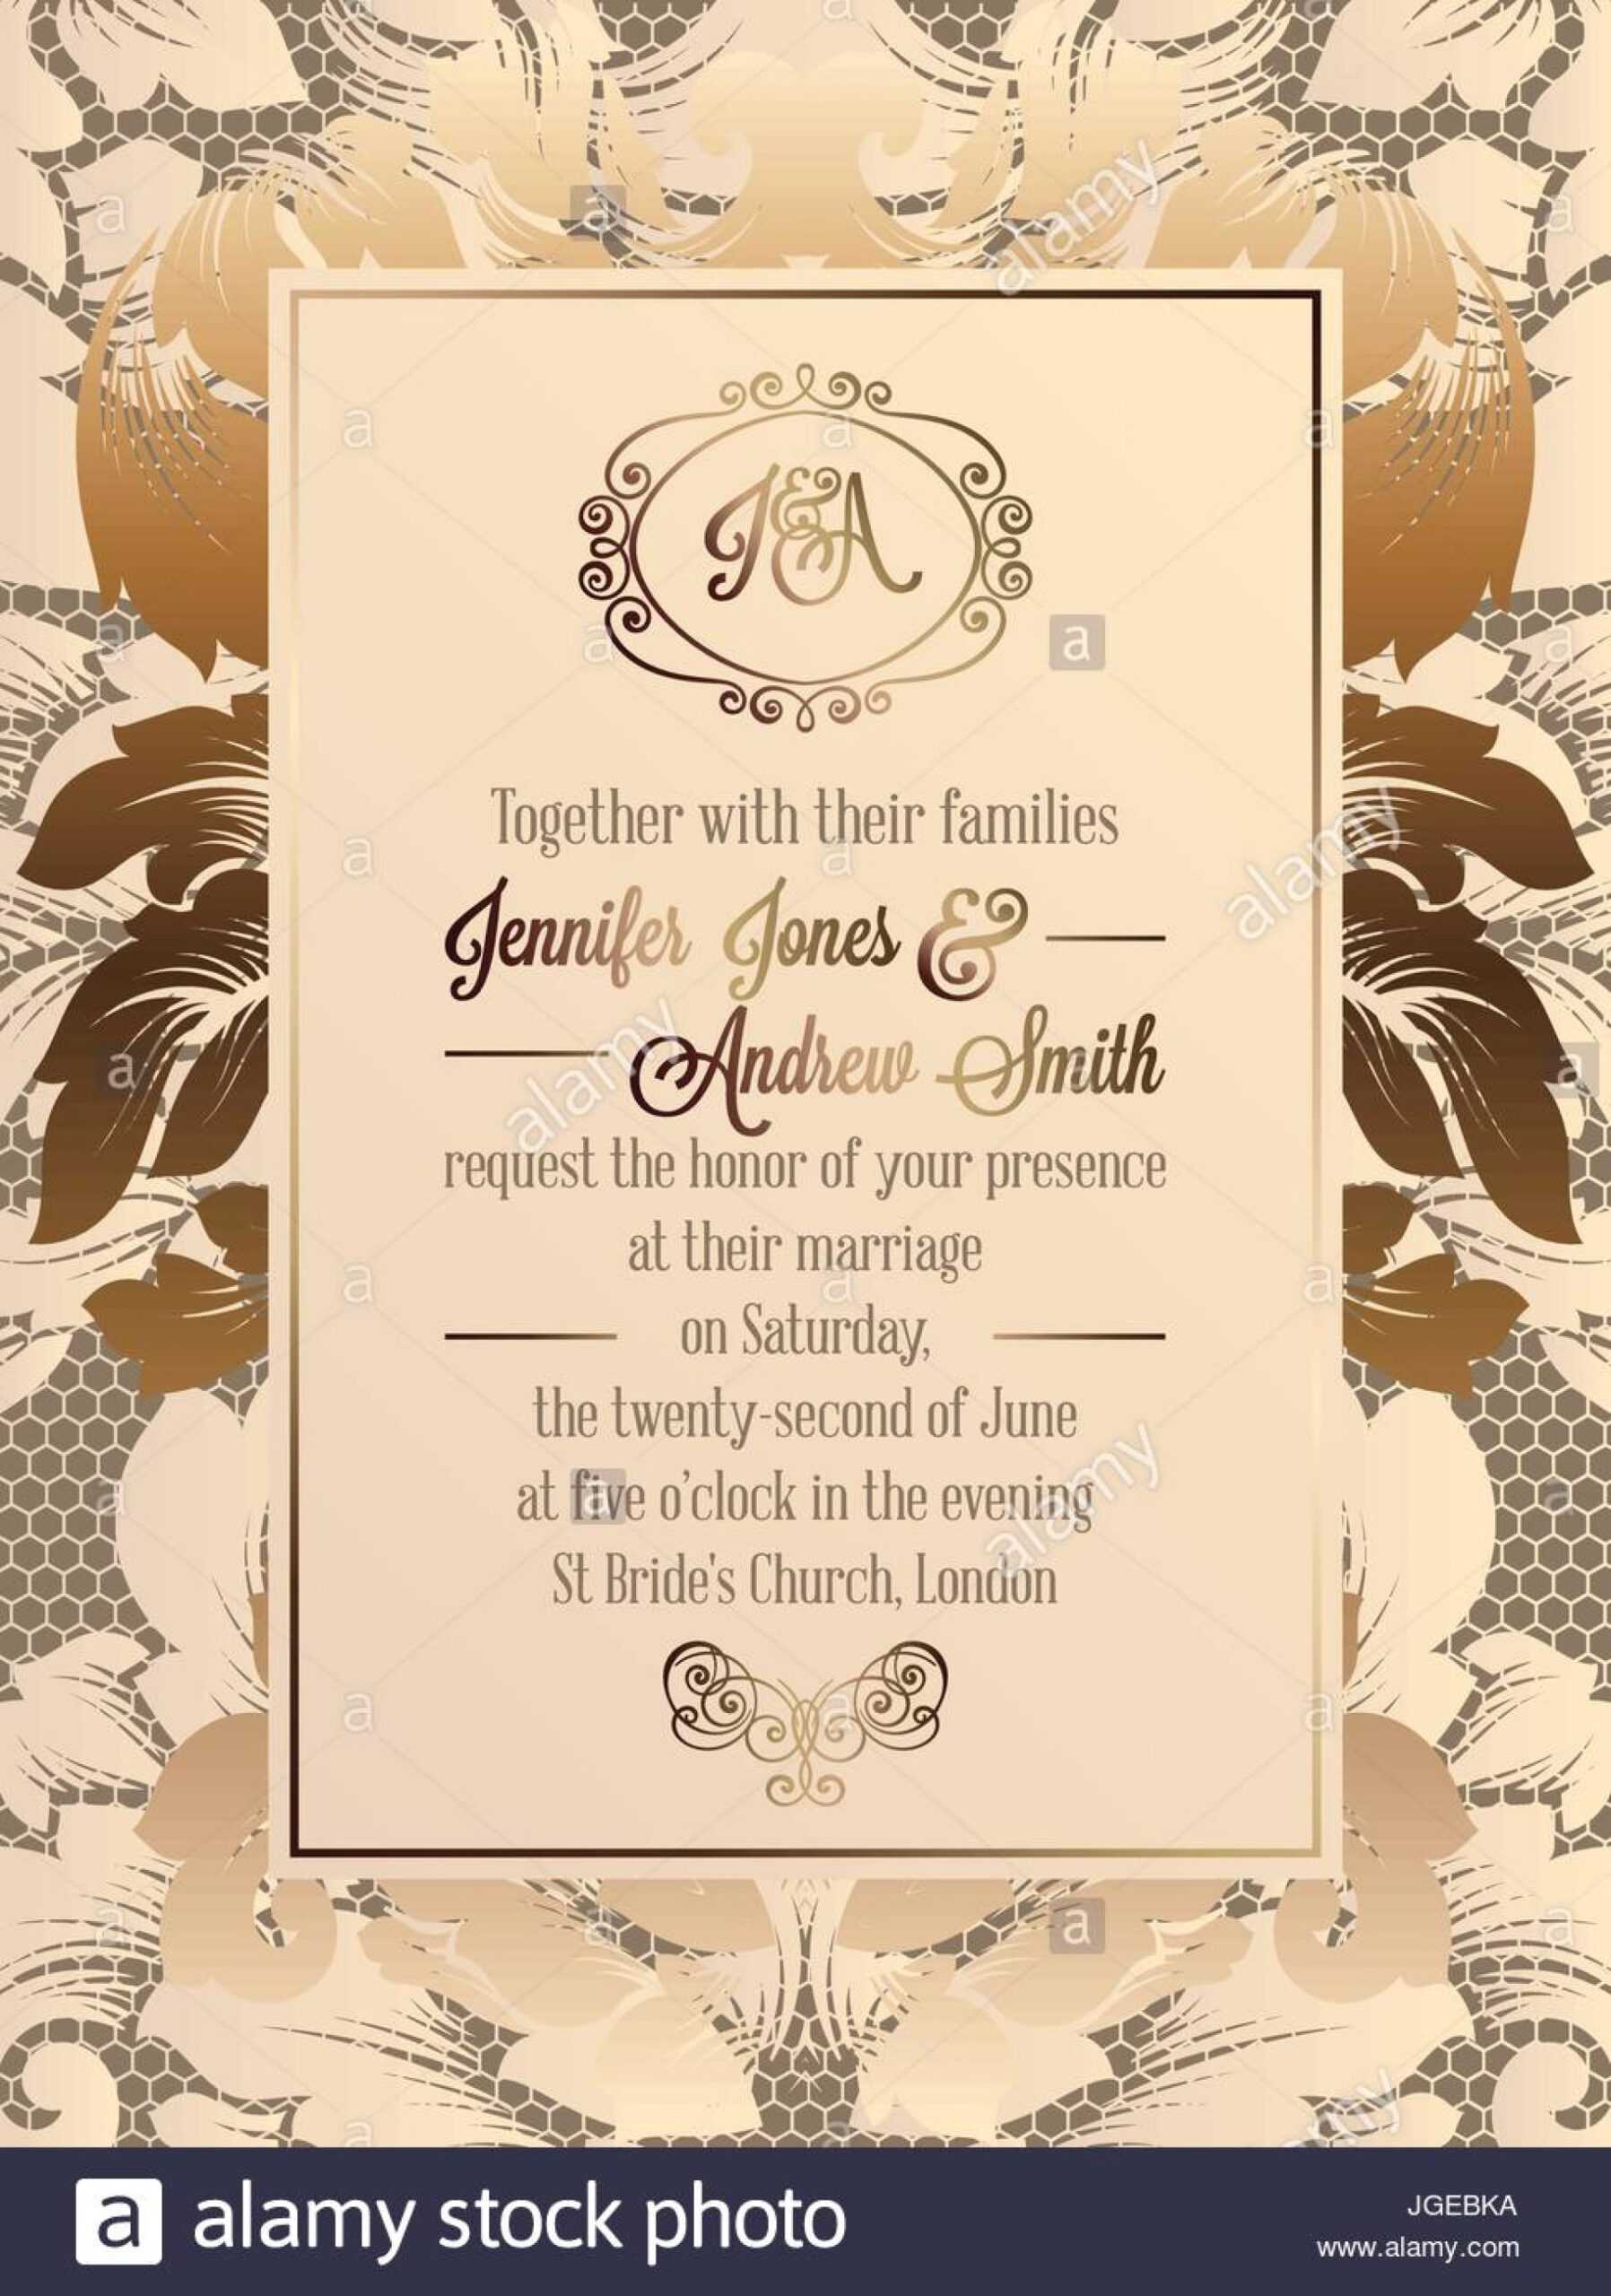 022 Template Ideas Gettyimages Church Invitation Cards Inside Church Invite Cards Template